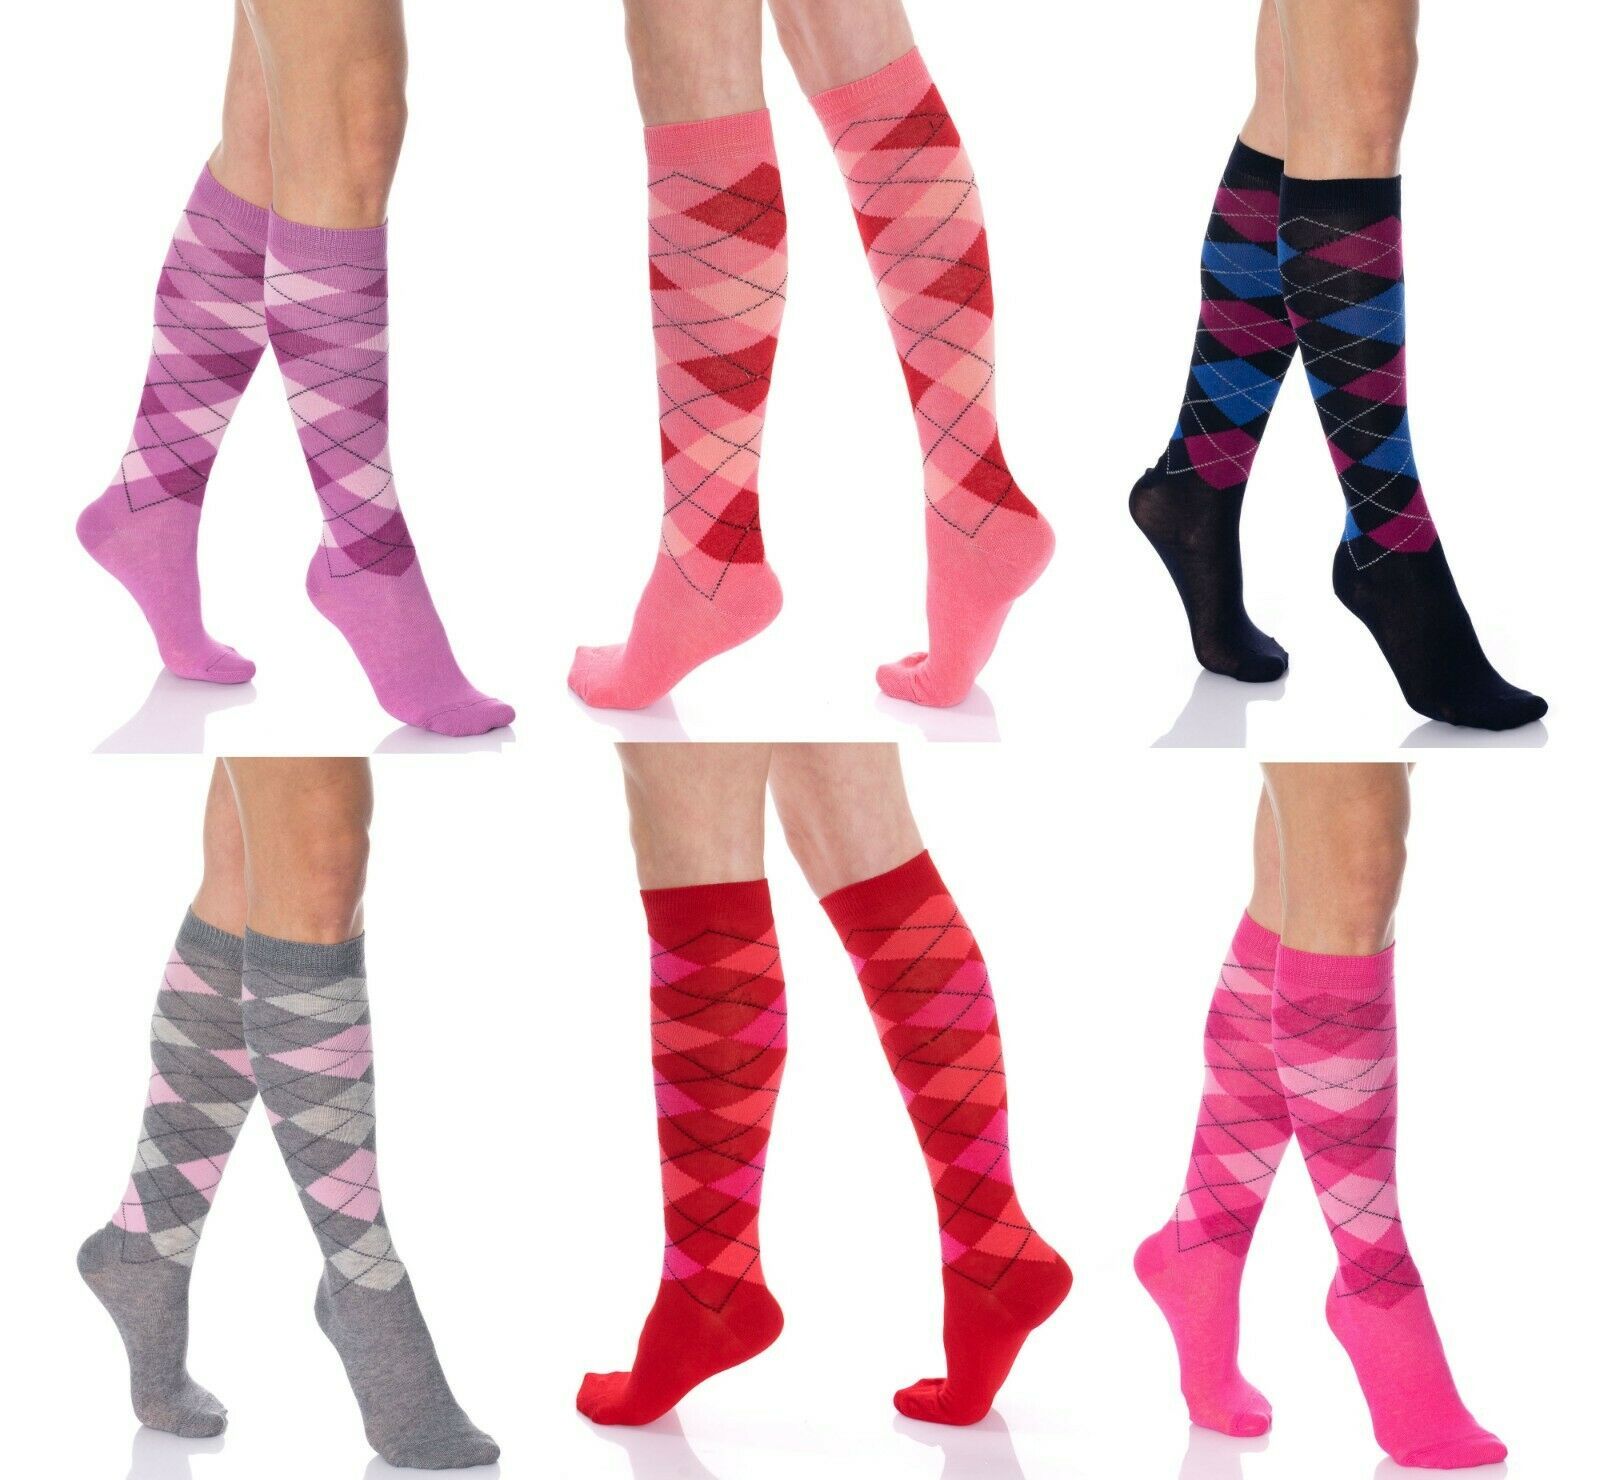 Over the Calf Combed Cotton Socks for Women Argyle Patterned 6 Pairs 9-11